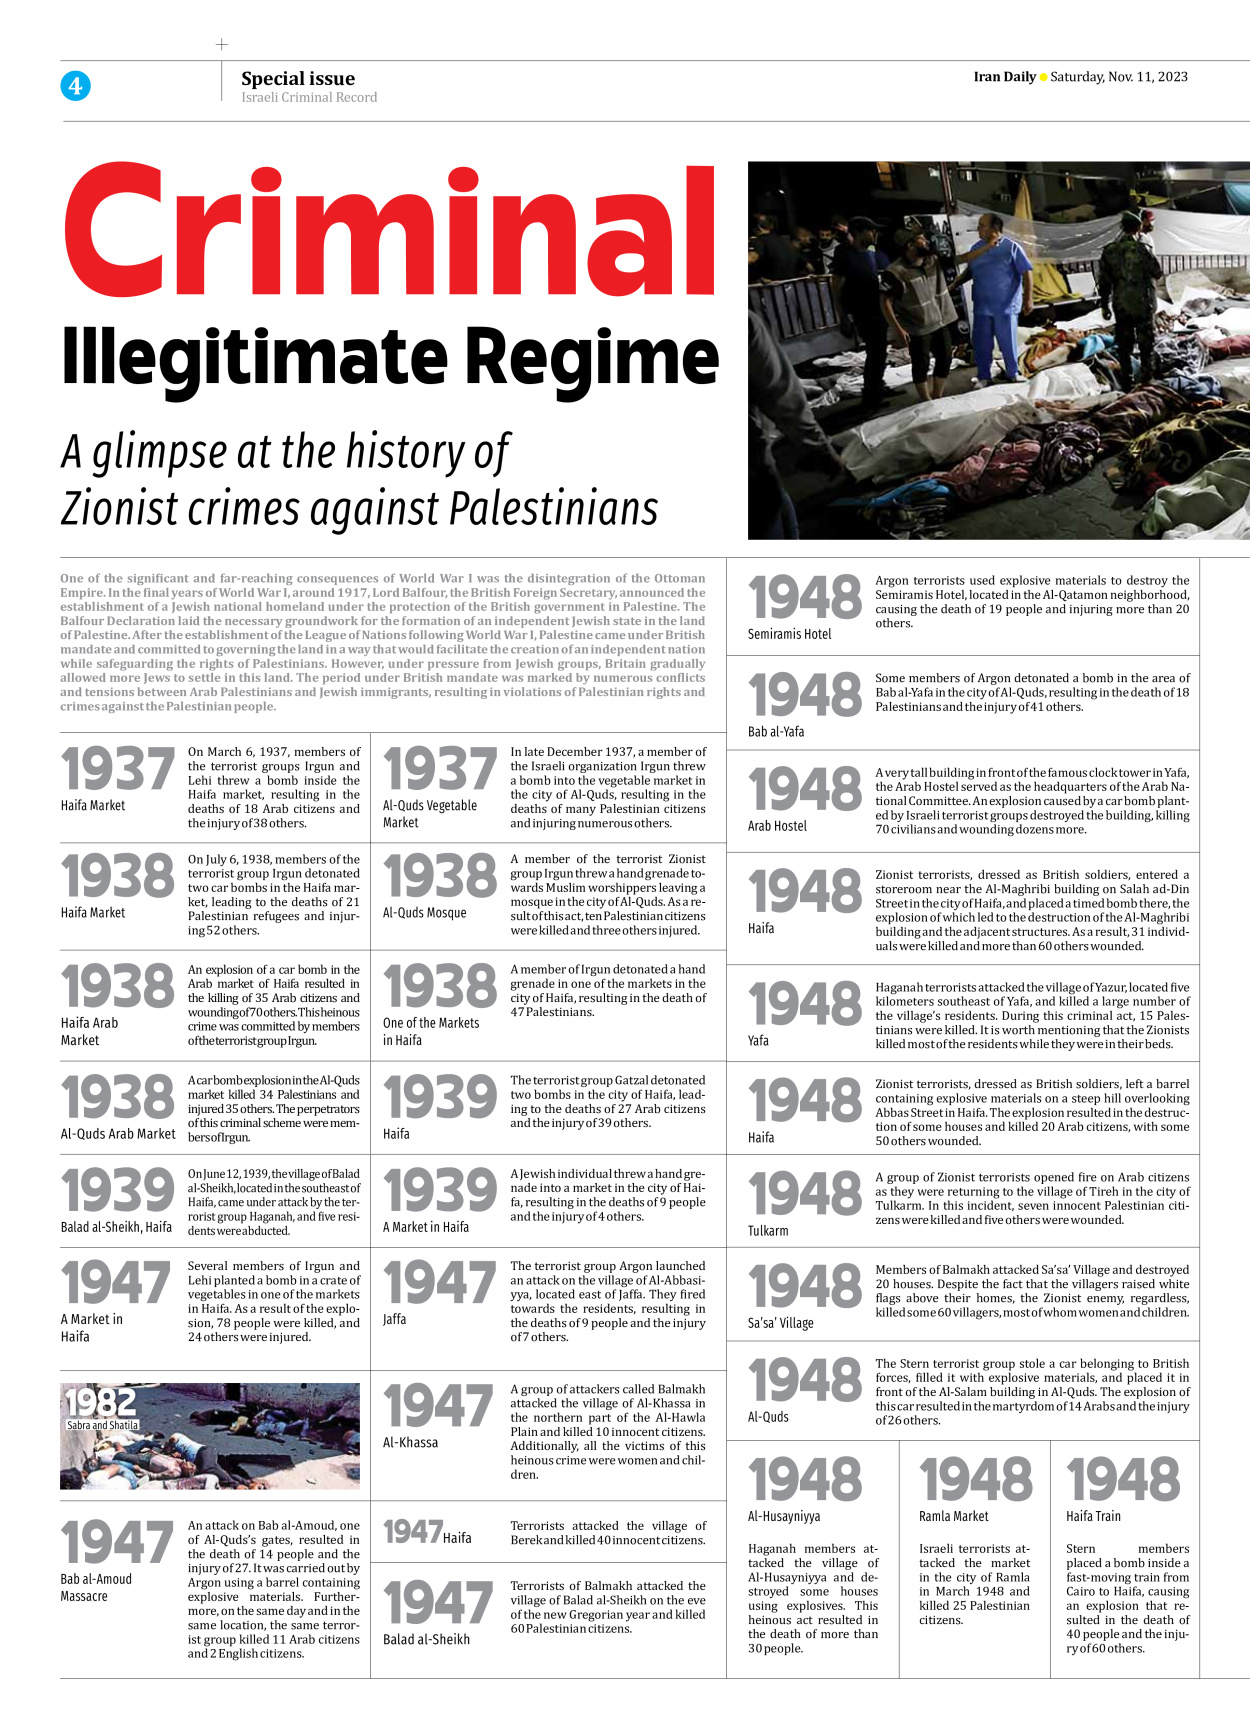 Iran Daily - Number Seven Thousand Four Hundred and Thirty One - 11 November 2023 - Page 4